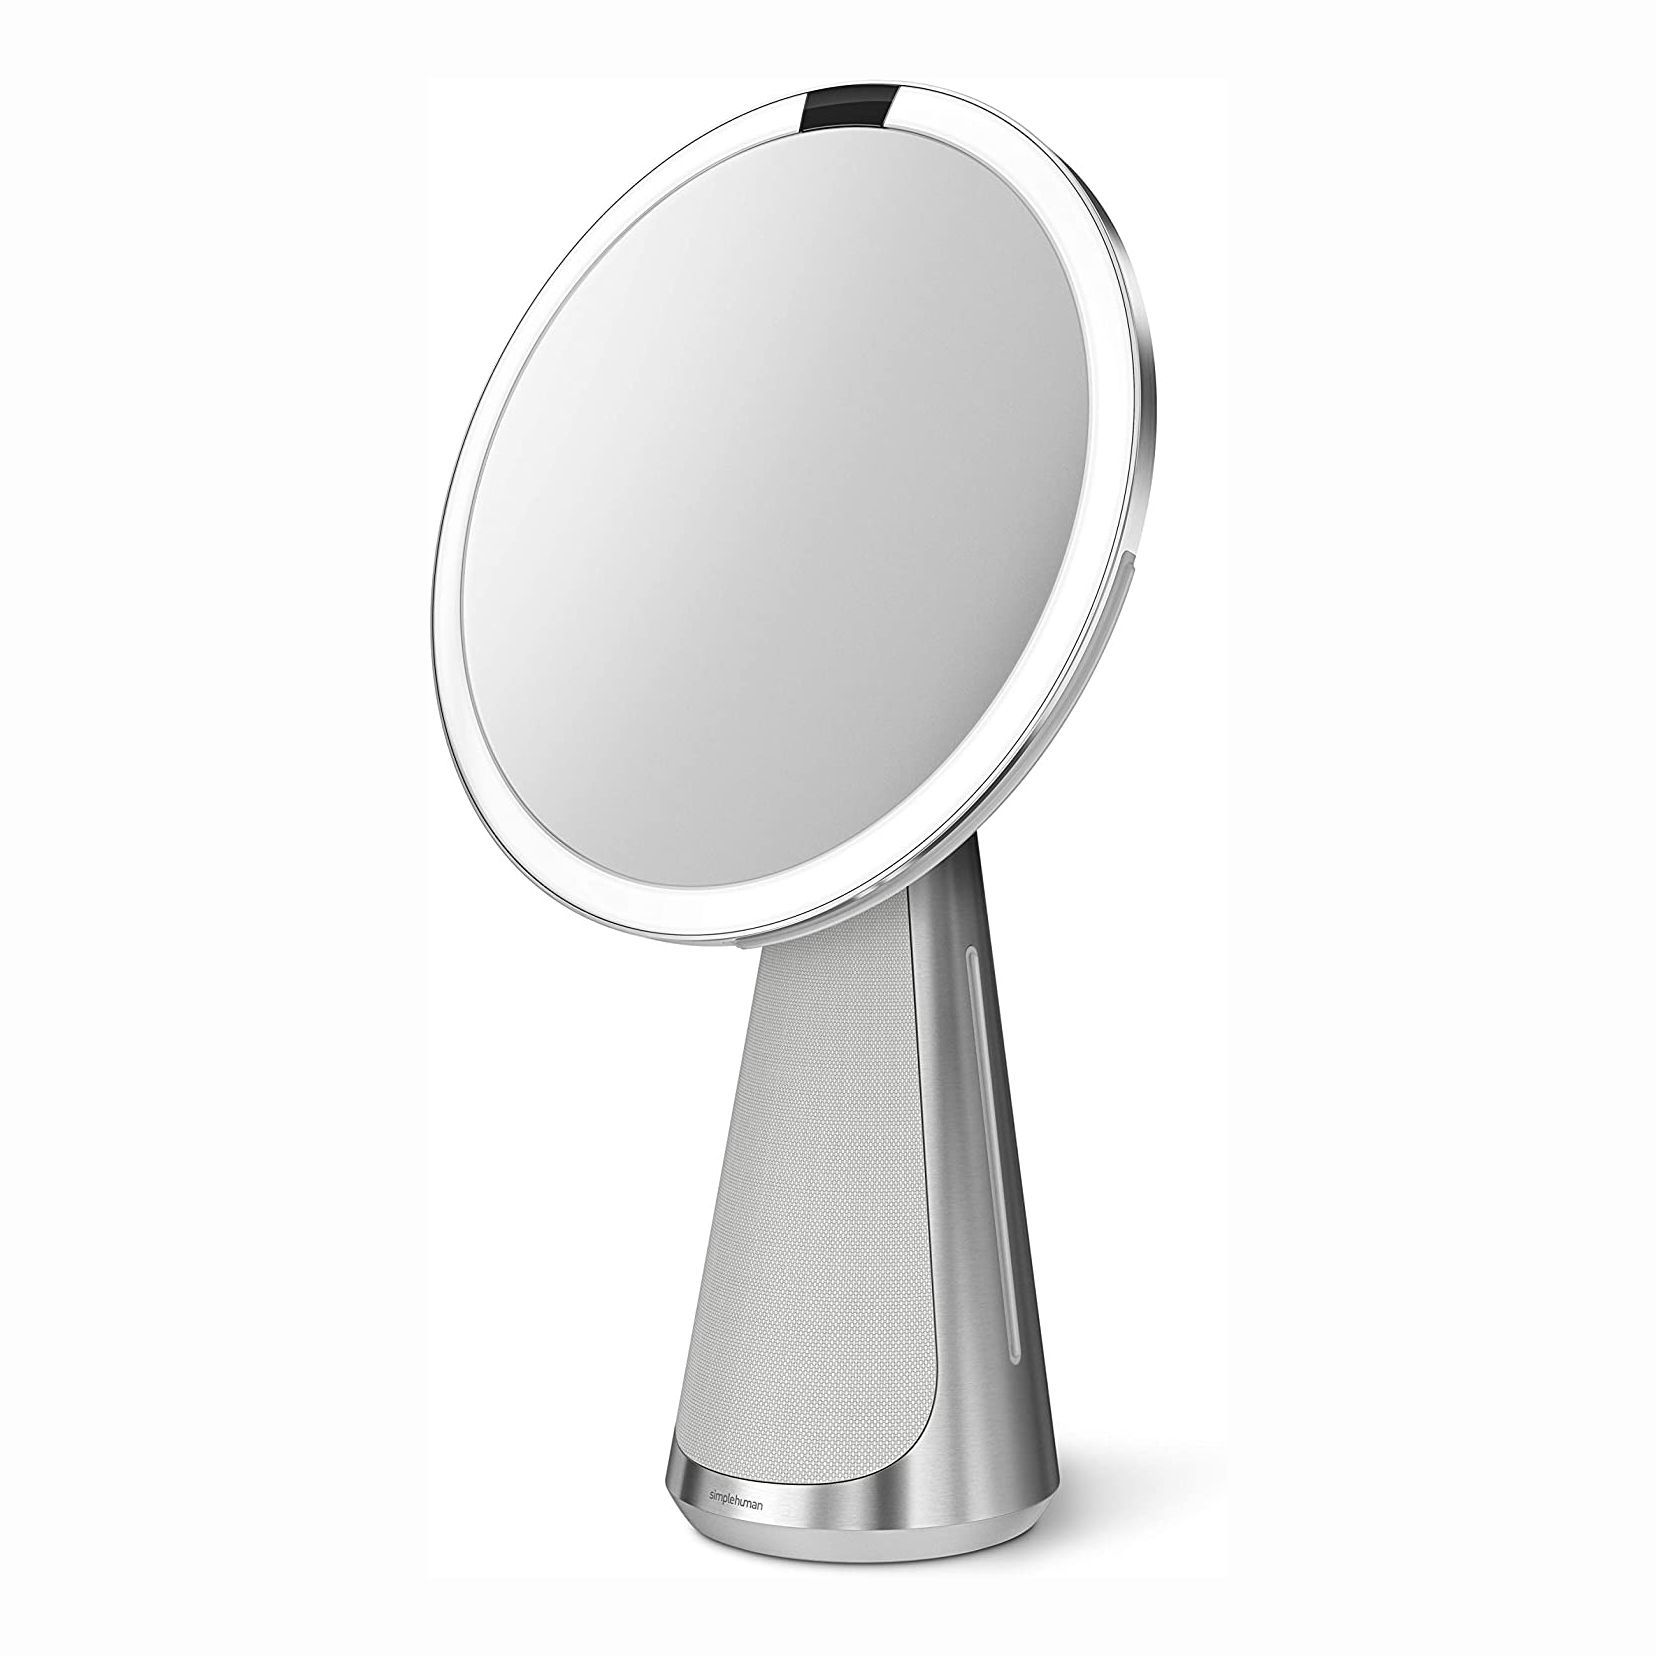 Vanity Makeup Mirrors, Beautural 10x Magnifying Lighted Vanity Makeup Mirror With Natural White Led